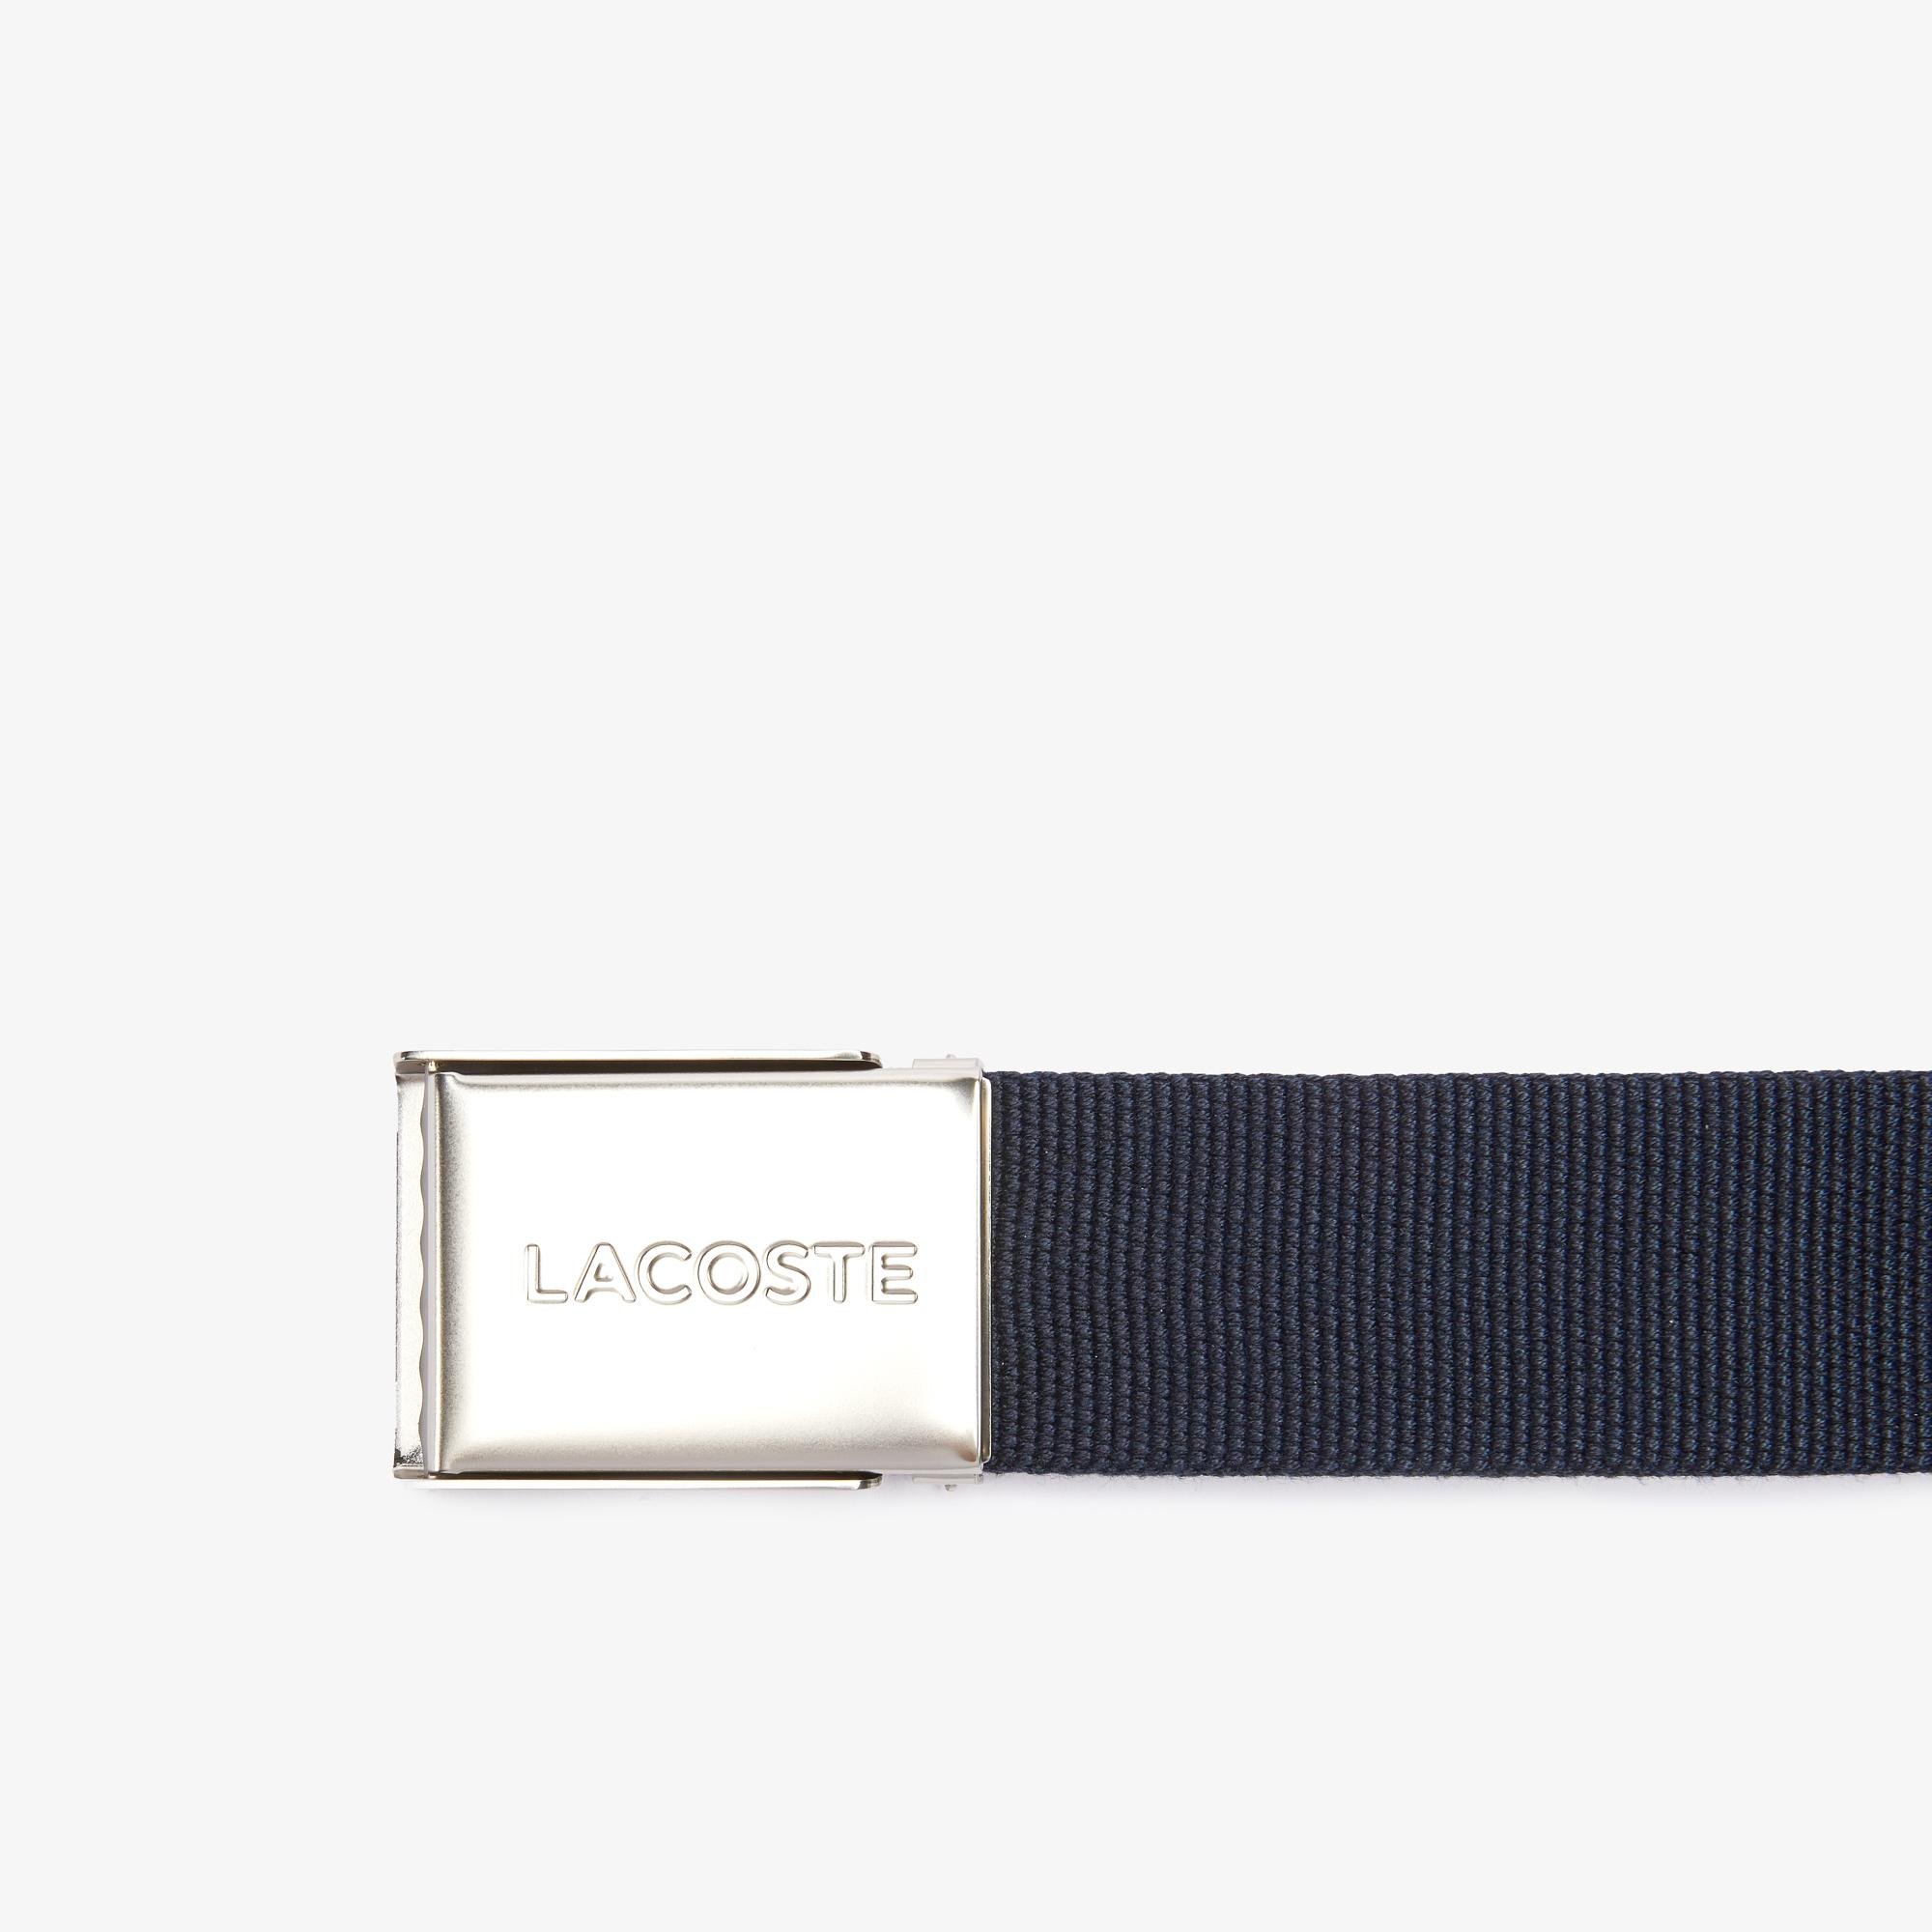 Lacoste Men's Made İn France Lacoste Engraved Buckle Woven Fabric Belt